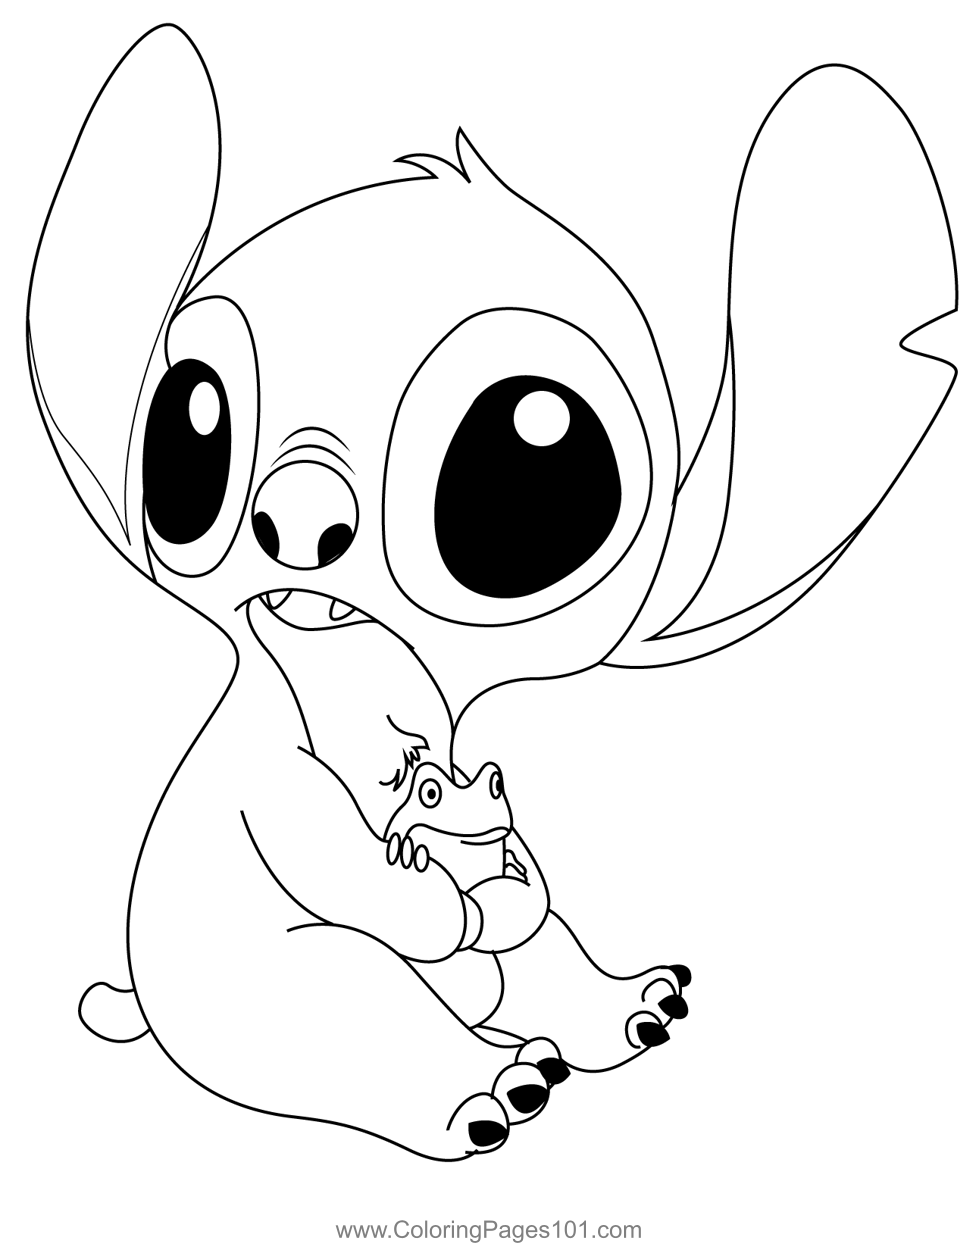 Stitch Coloring Pages for Kids by The Learning Apps